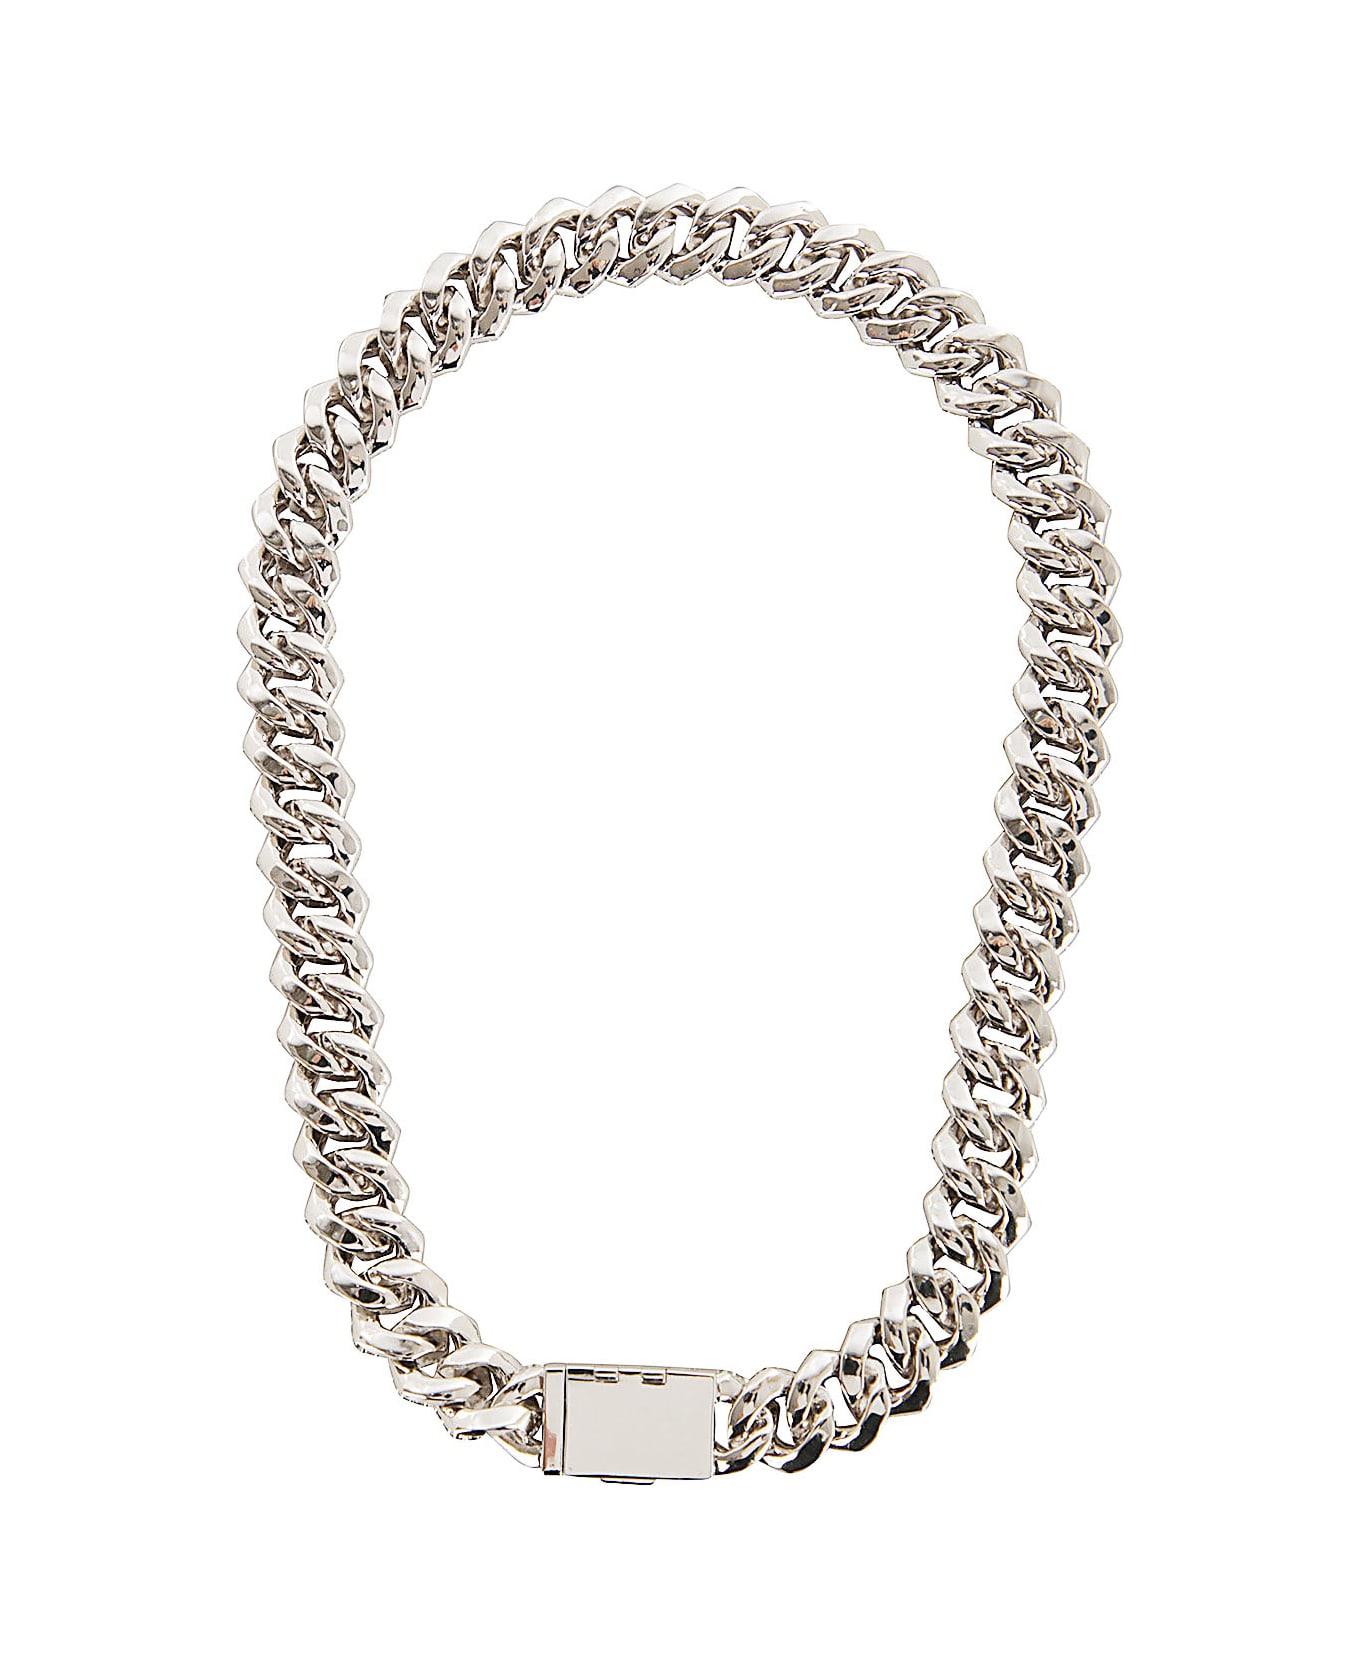 Darkai White Prong Pave Necklace - White ネックレス